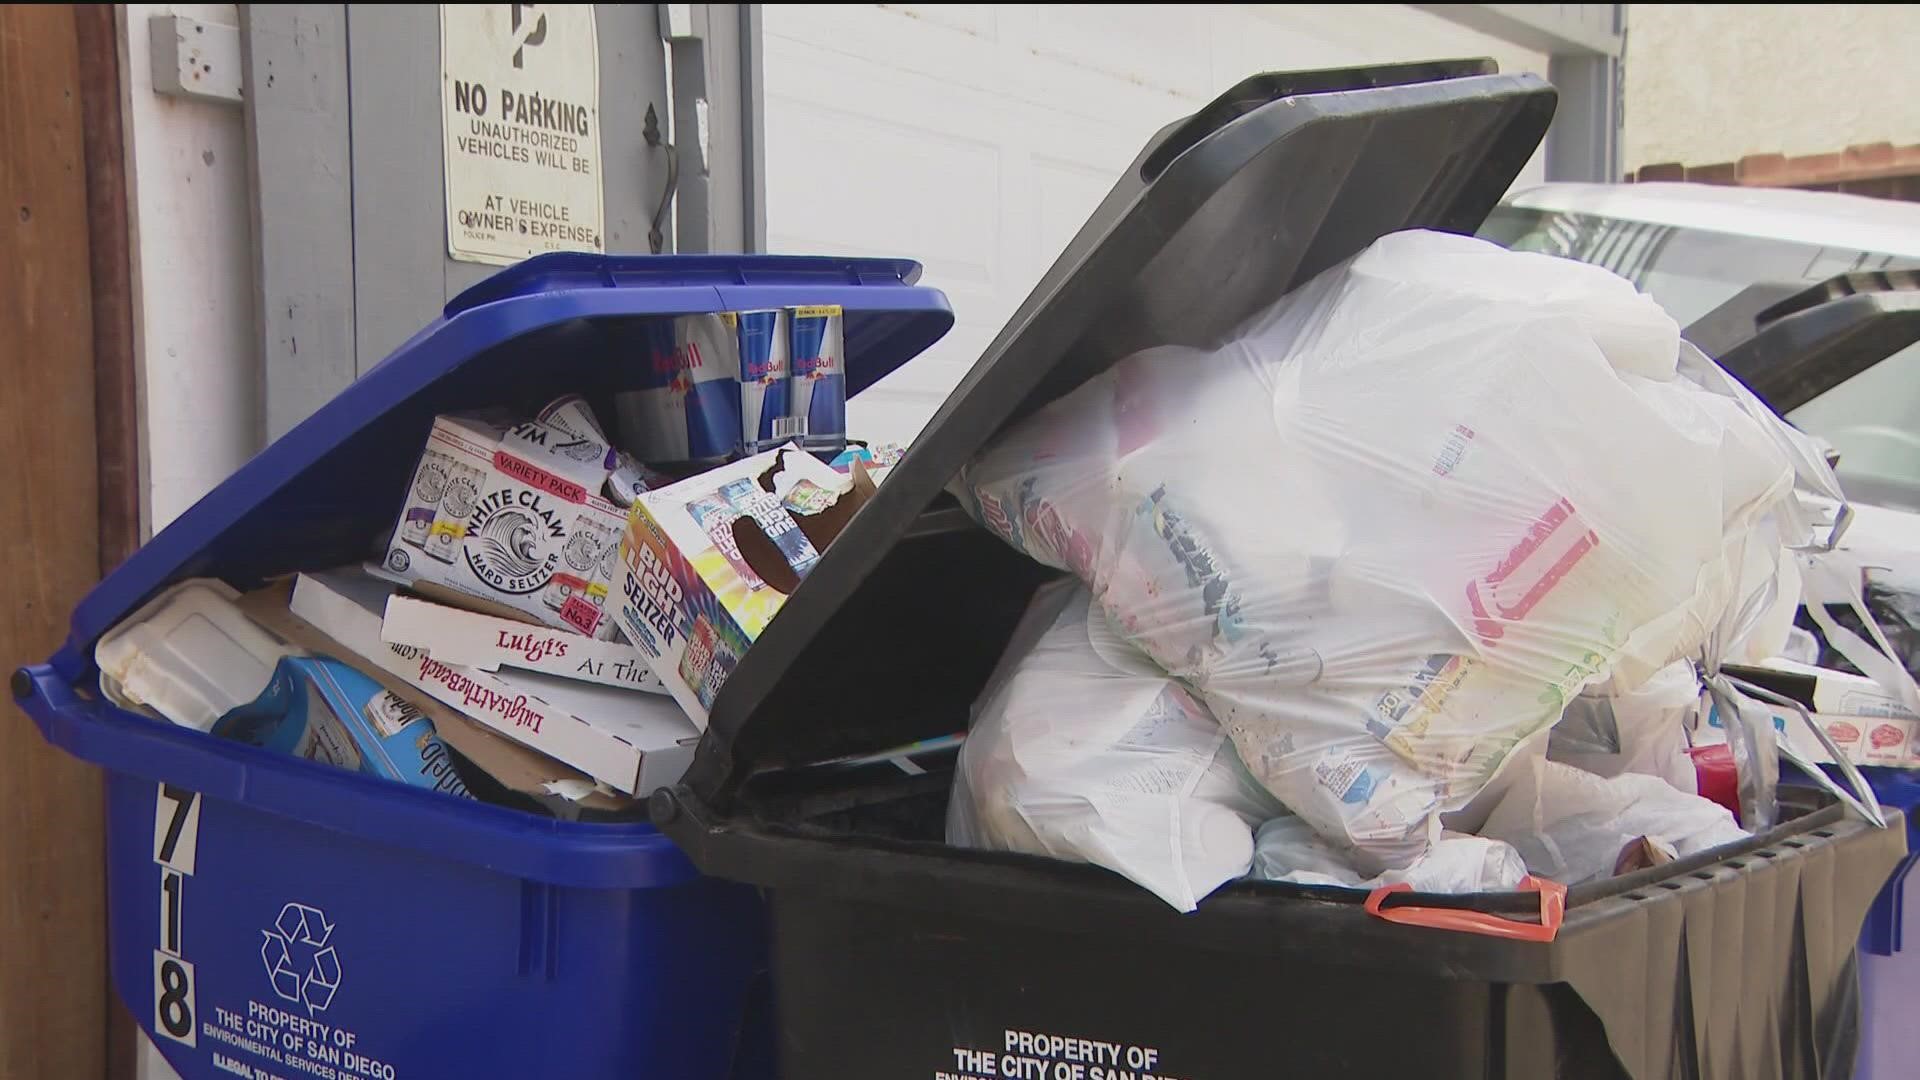 Should San Diego's current trash-service law be changed? | cbs8.com